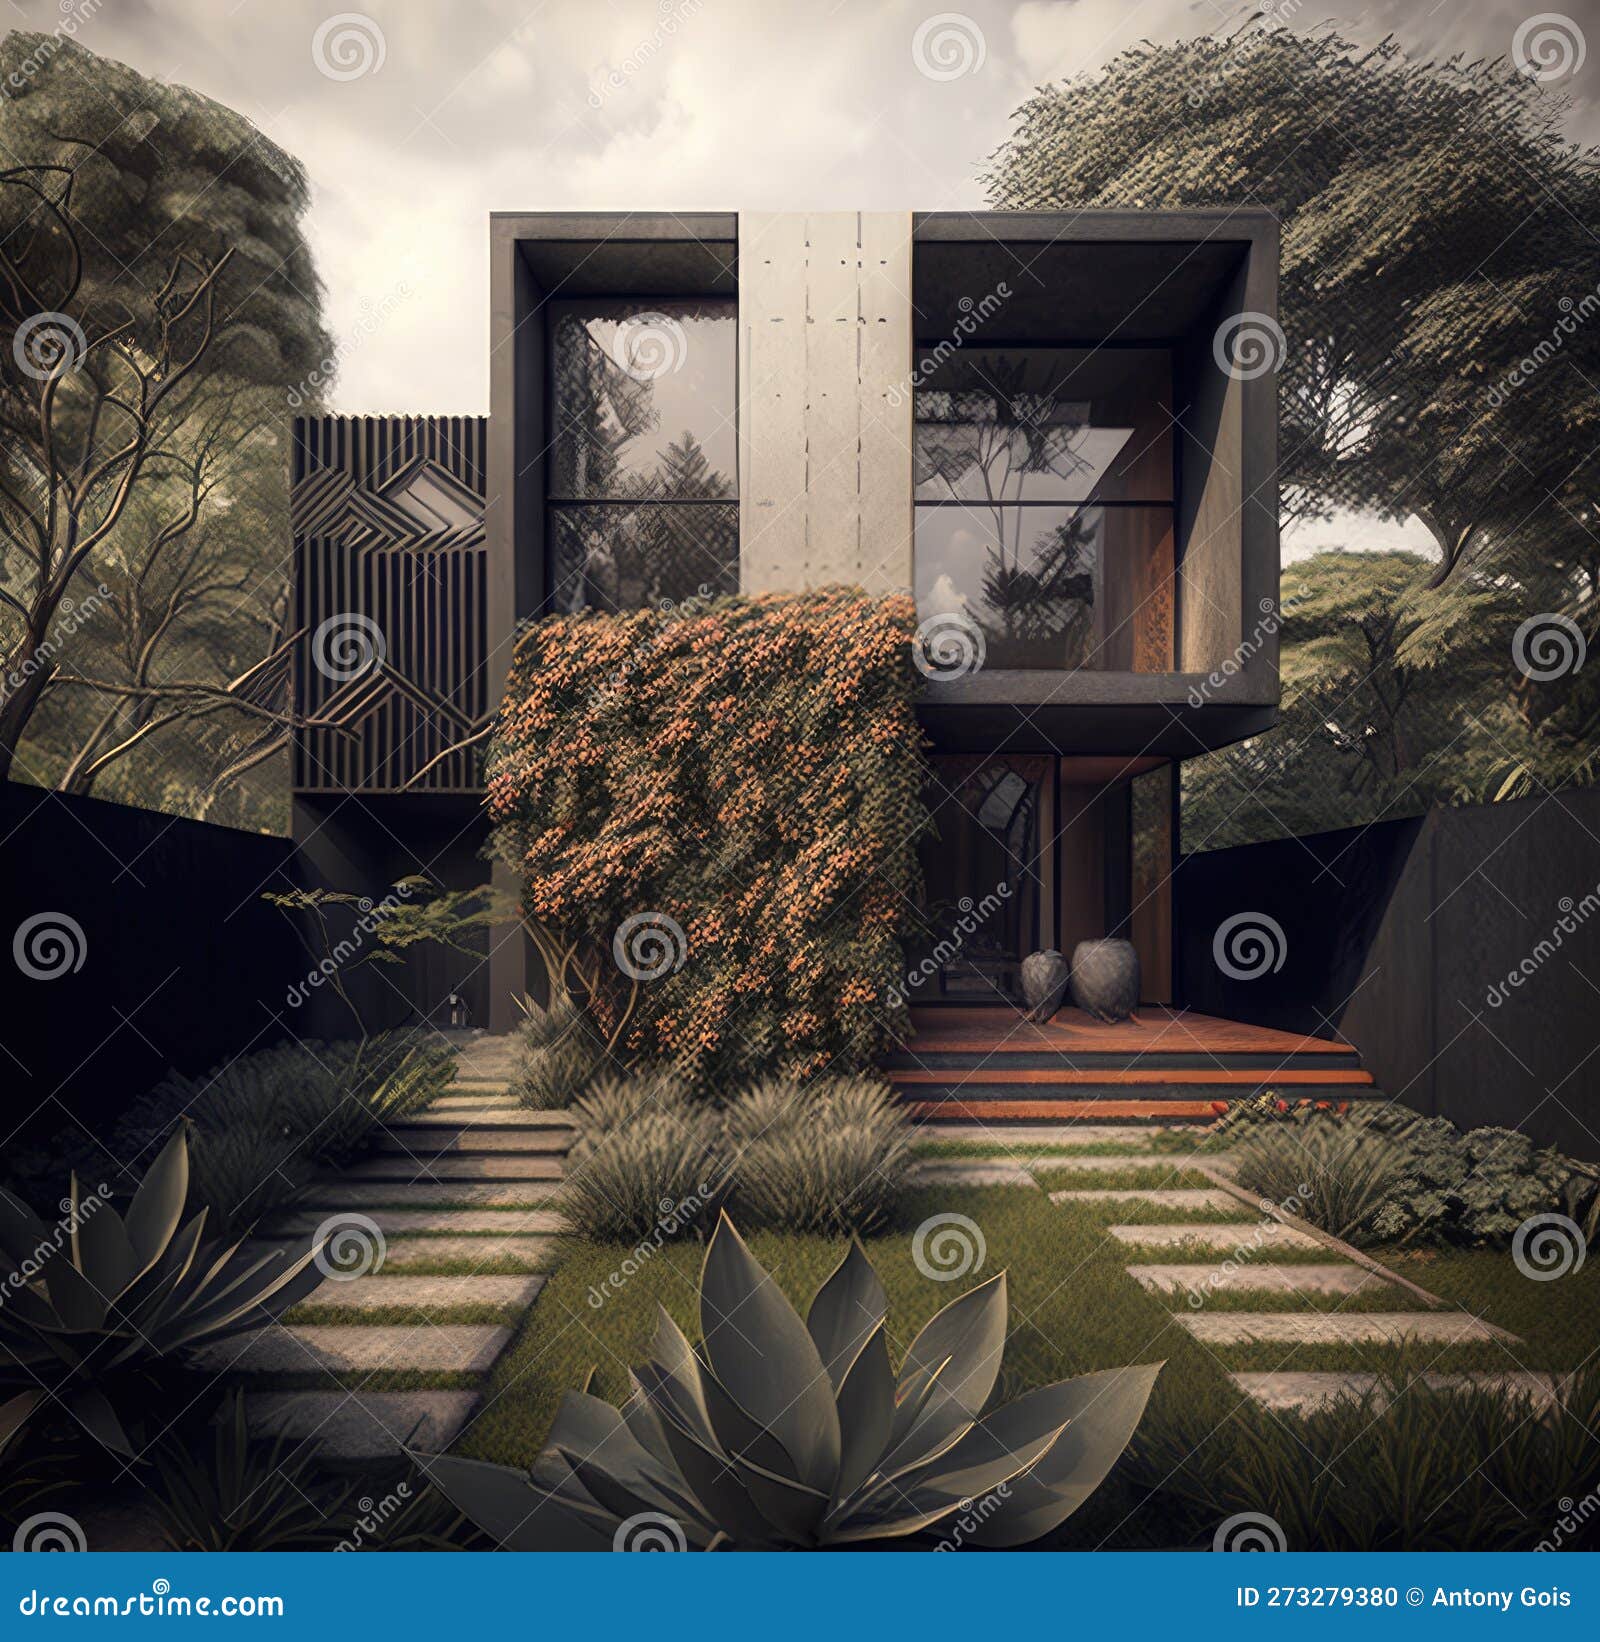 nature-inspired fictional house s created in high-quality generative ai